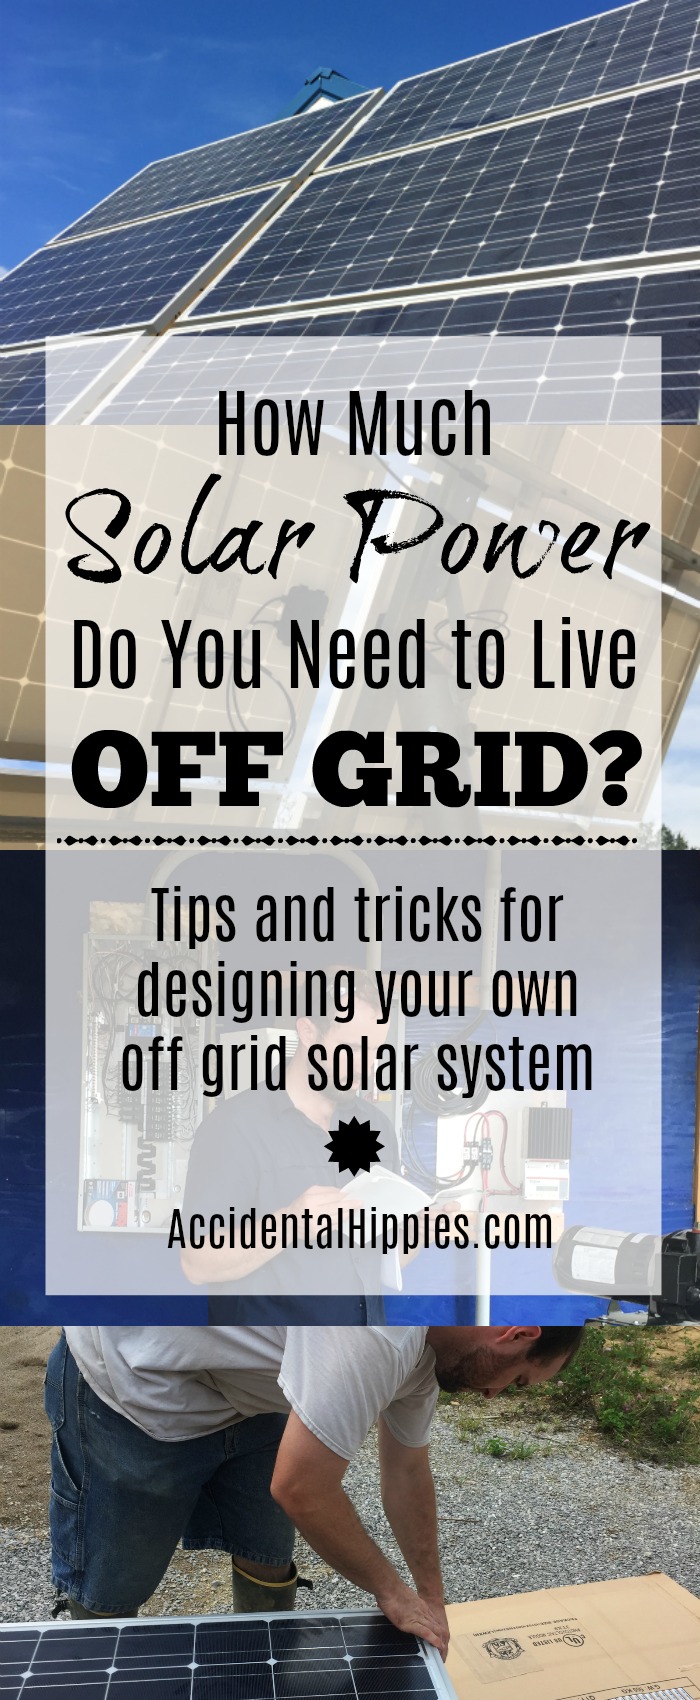 Everything we considered when designing our off grid solar system. Save energy, save money, and design the right system for you following these tips. #solarpower #offgrid